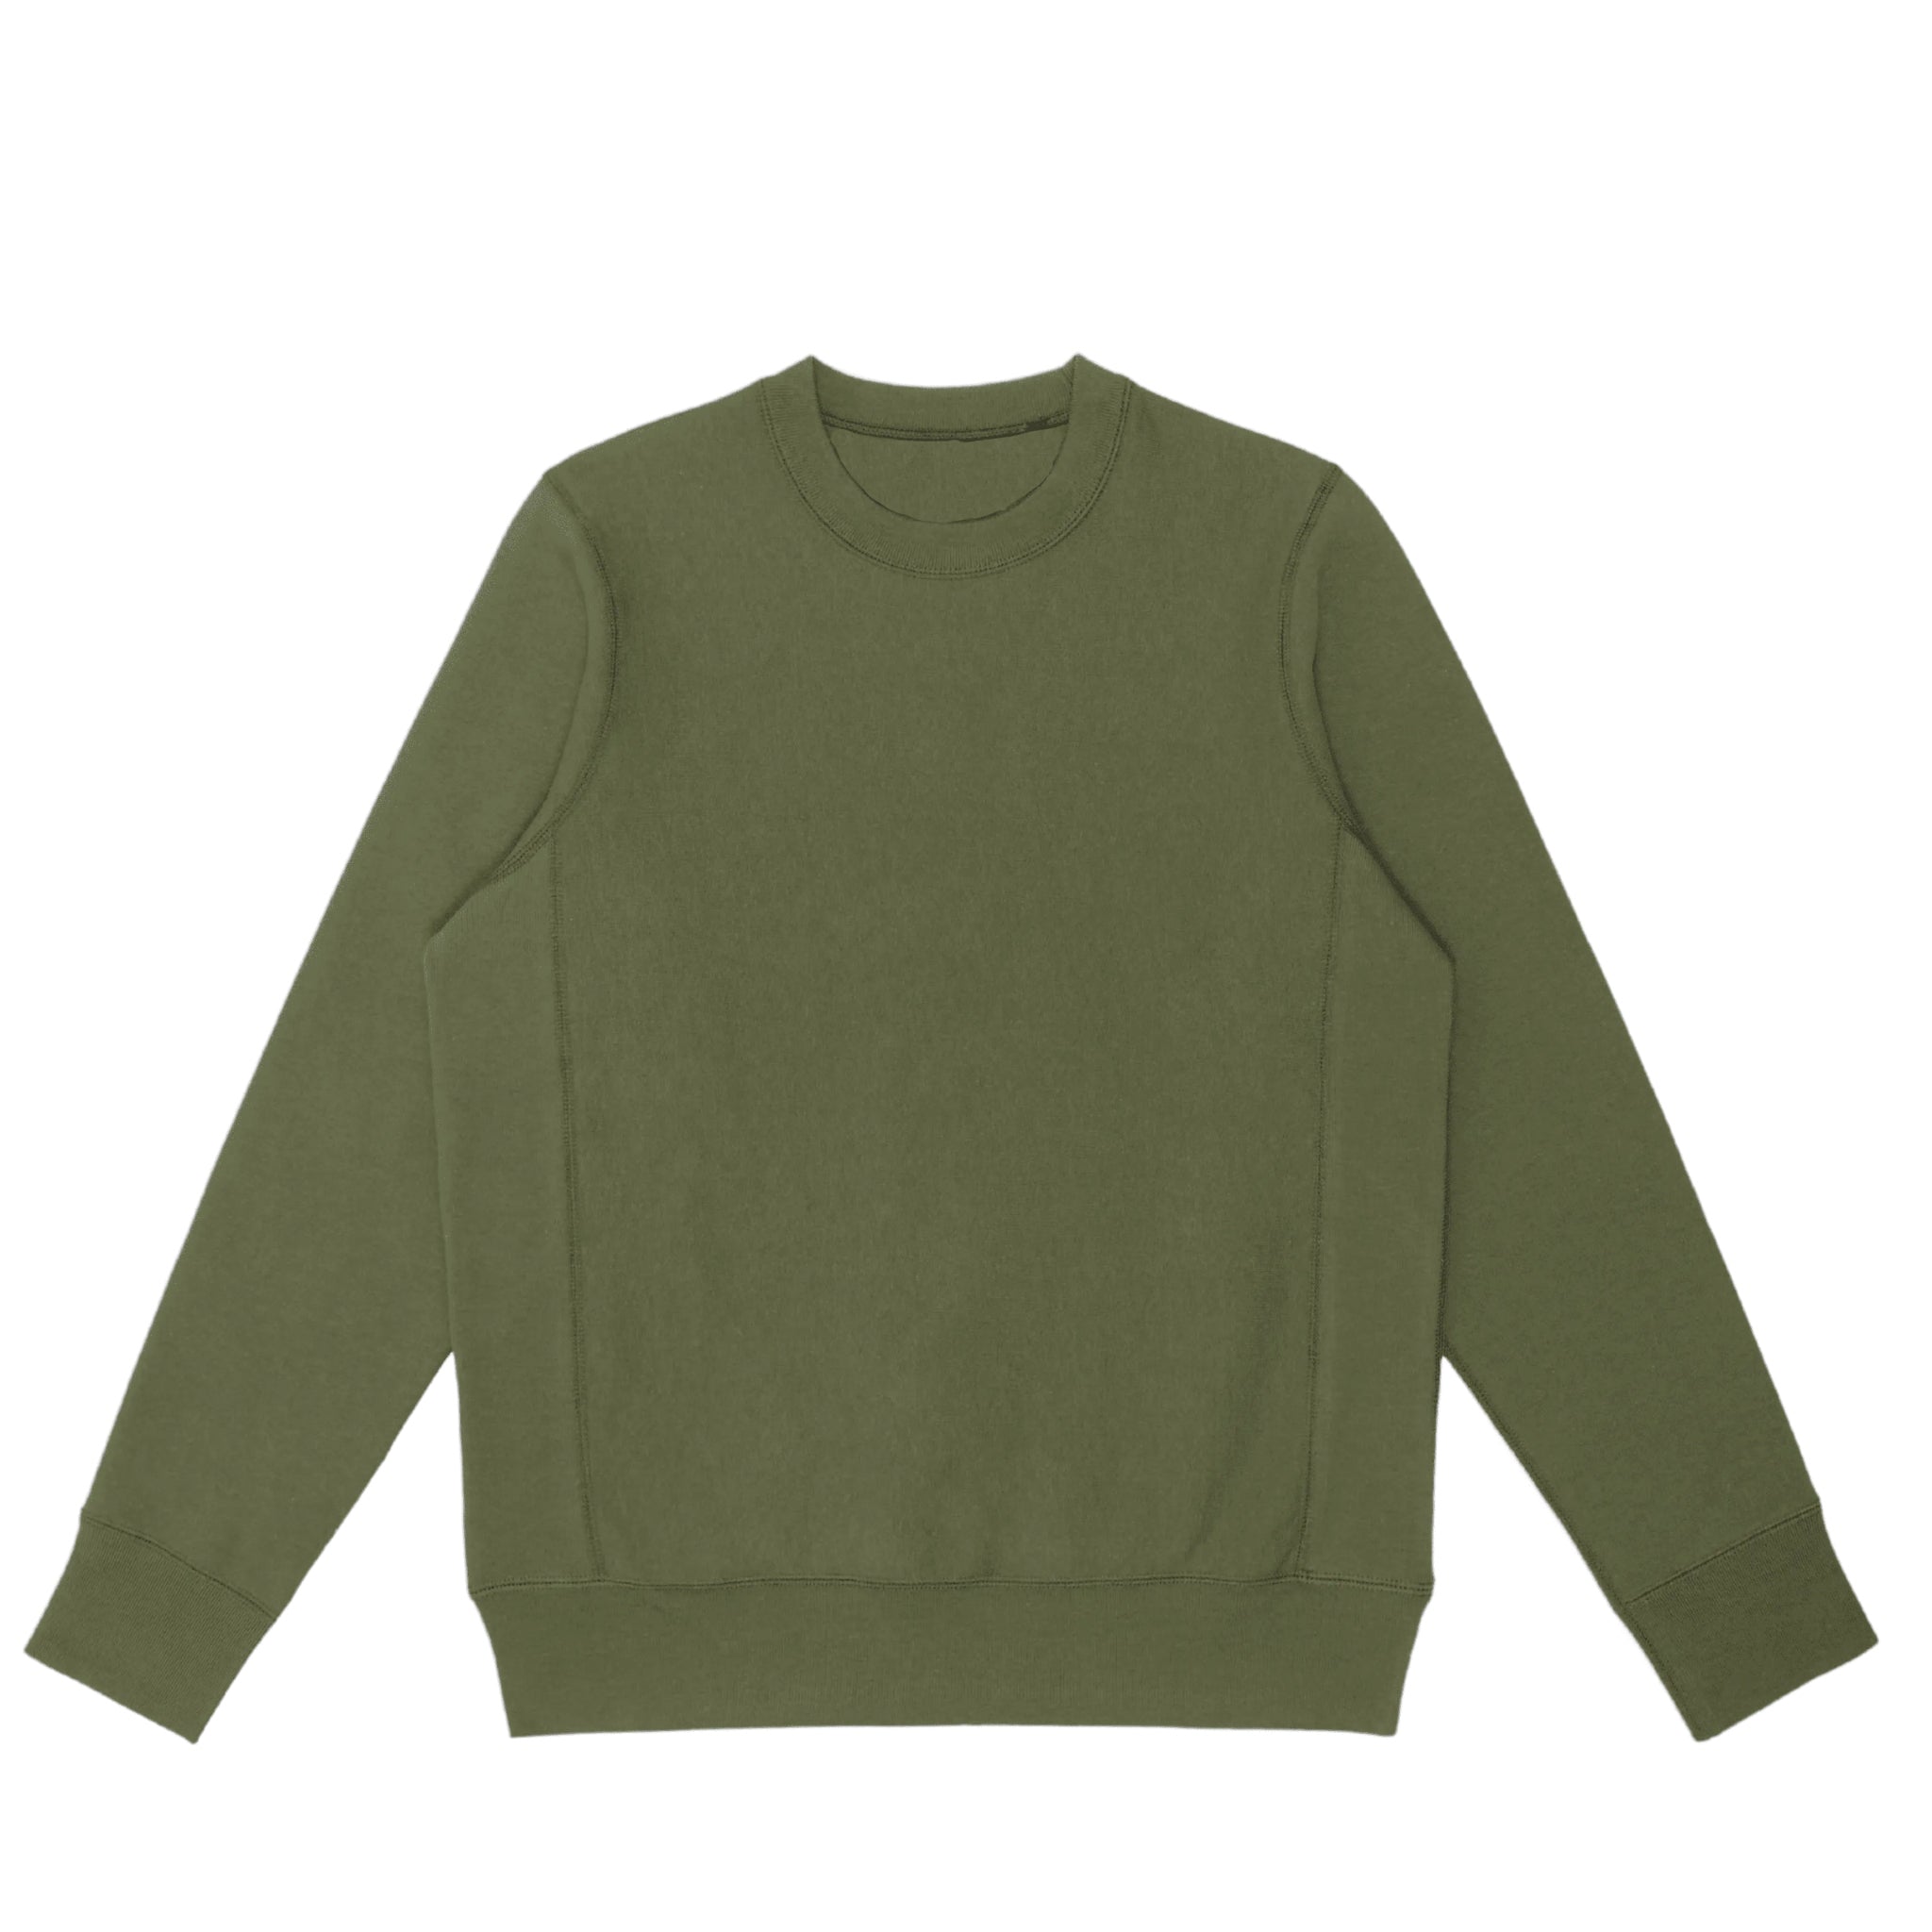 Front view of green heavyweight knit crewneck in 100% cotton